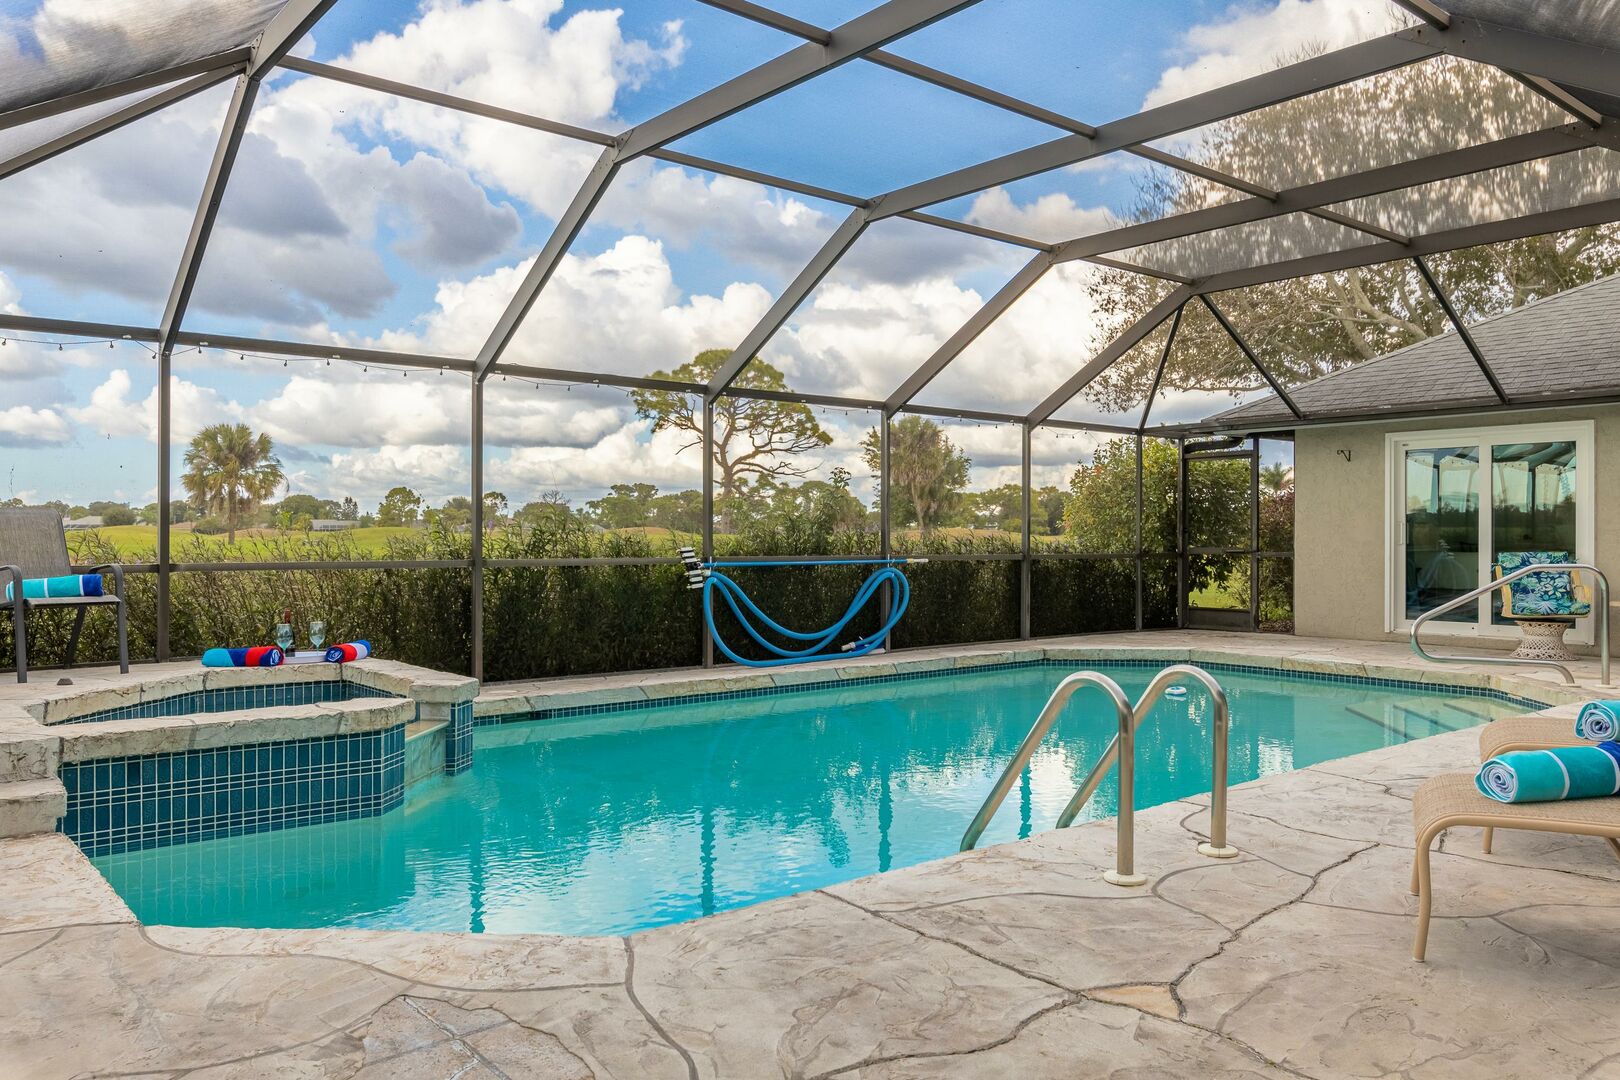 Private pool and spa vacation rental